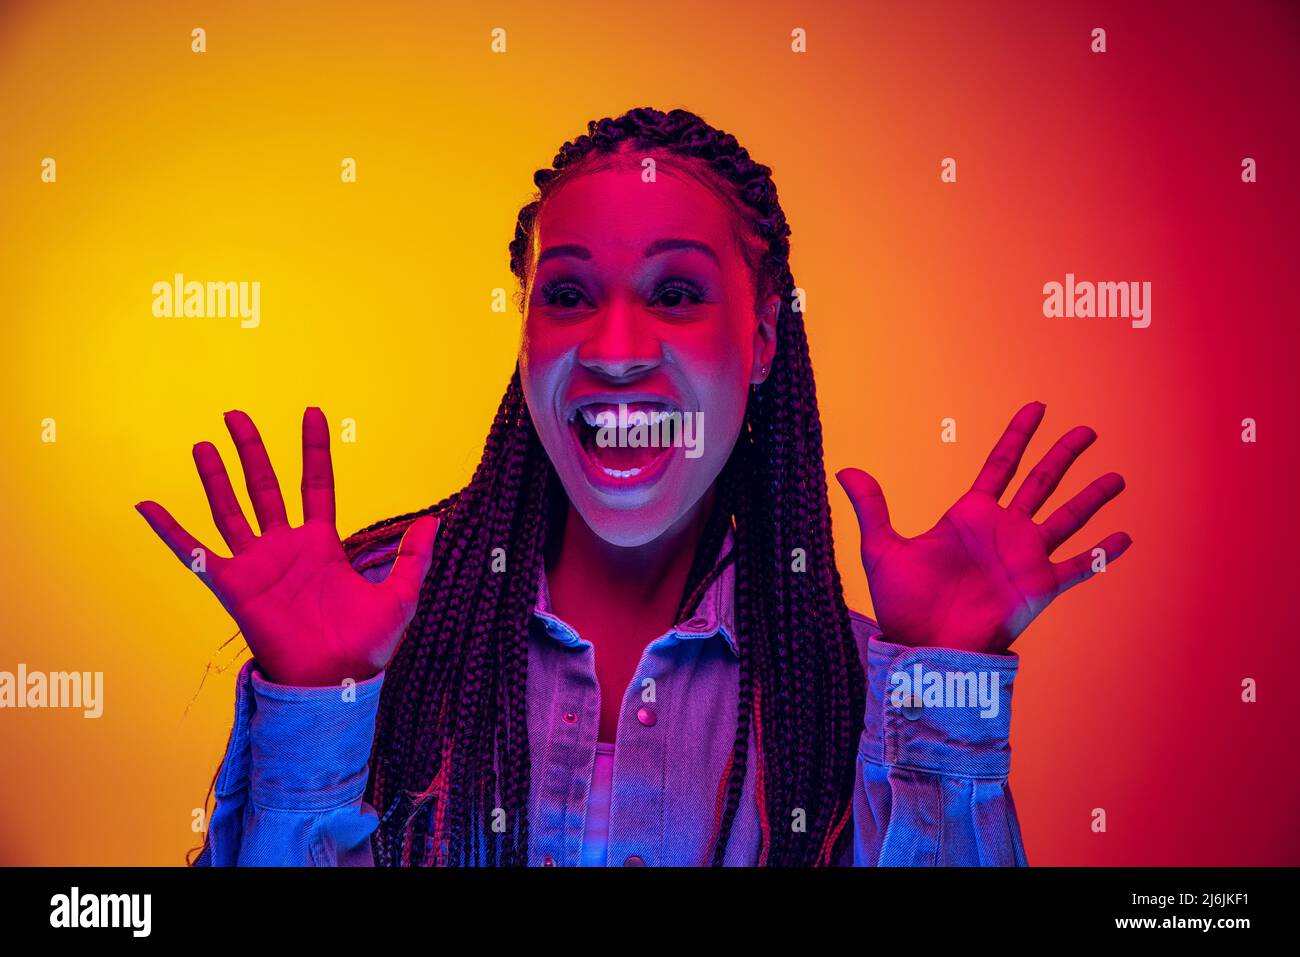 Closeup portrait of shouting isolated on gradient yellow pink background in neon light. Concept of beauty, art, fashion, youth and emotions Stock Photo